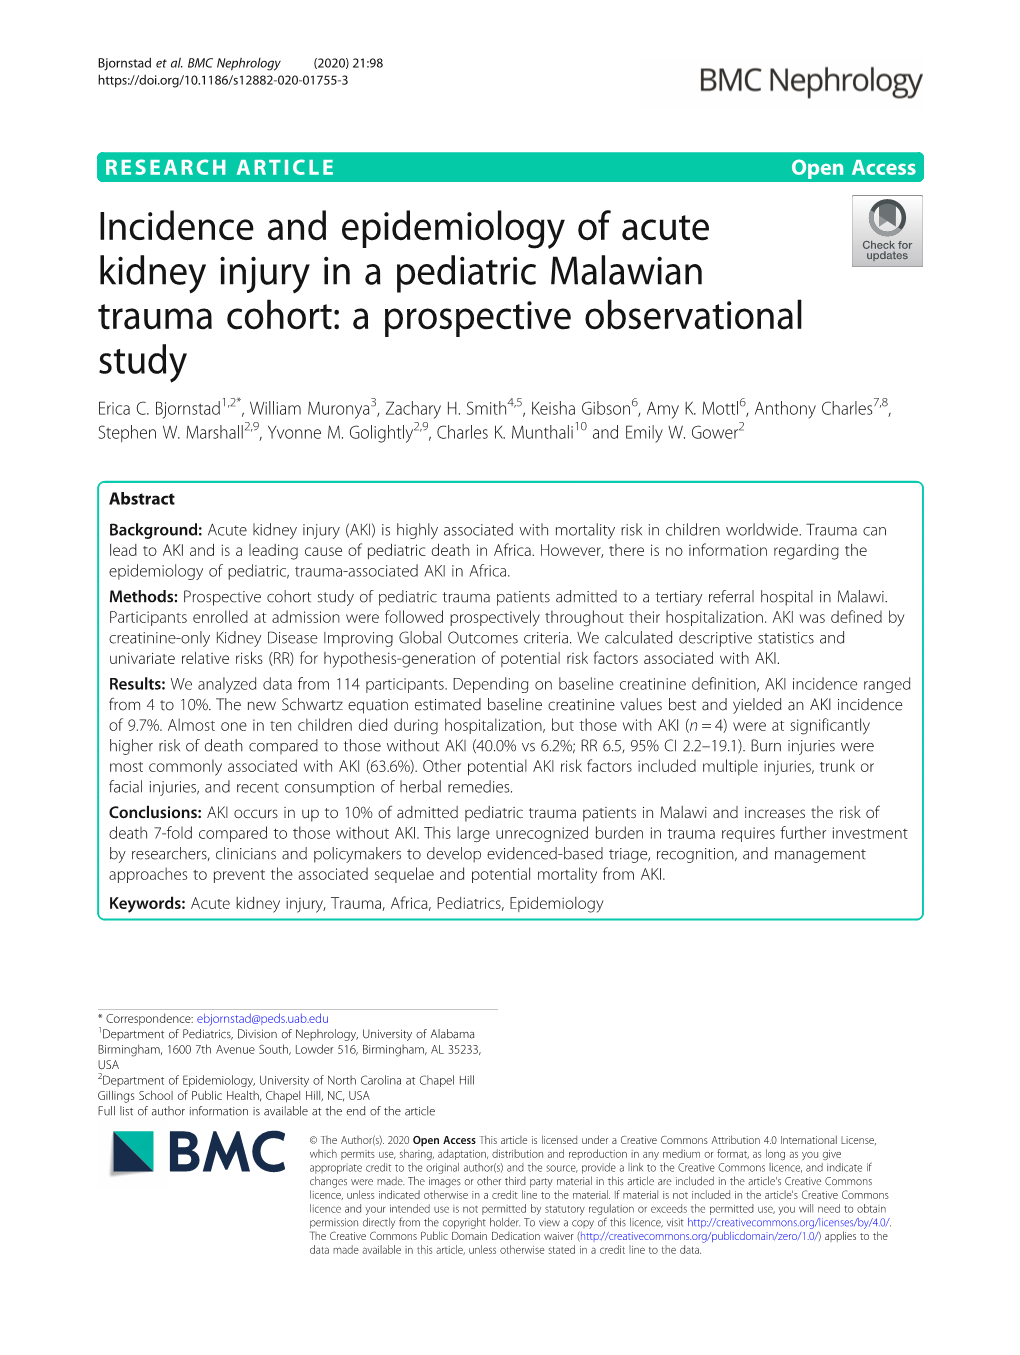 Incidence and Epidemiology of Acute Kidney Injury in a Pediatric Malawian Trauma Cohort: a Prospective Observational Study Erica C